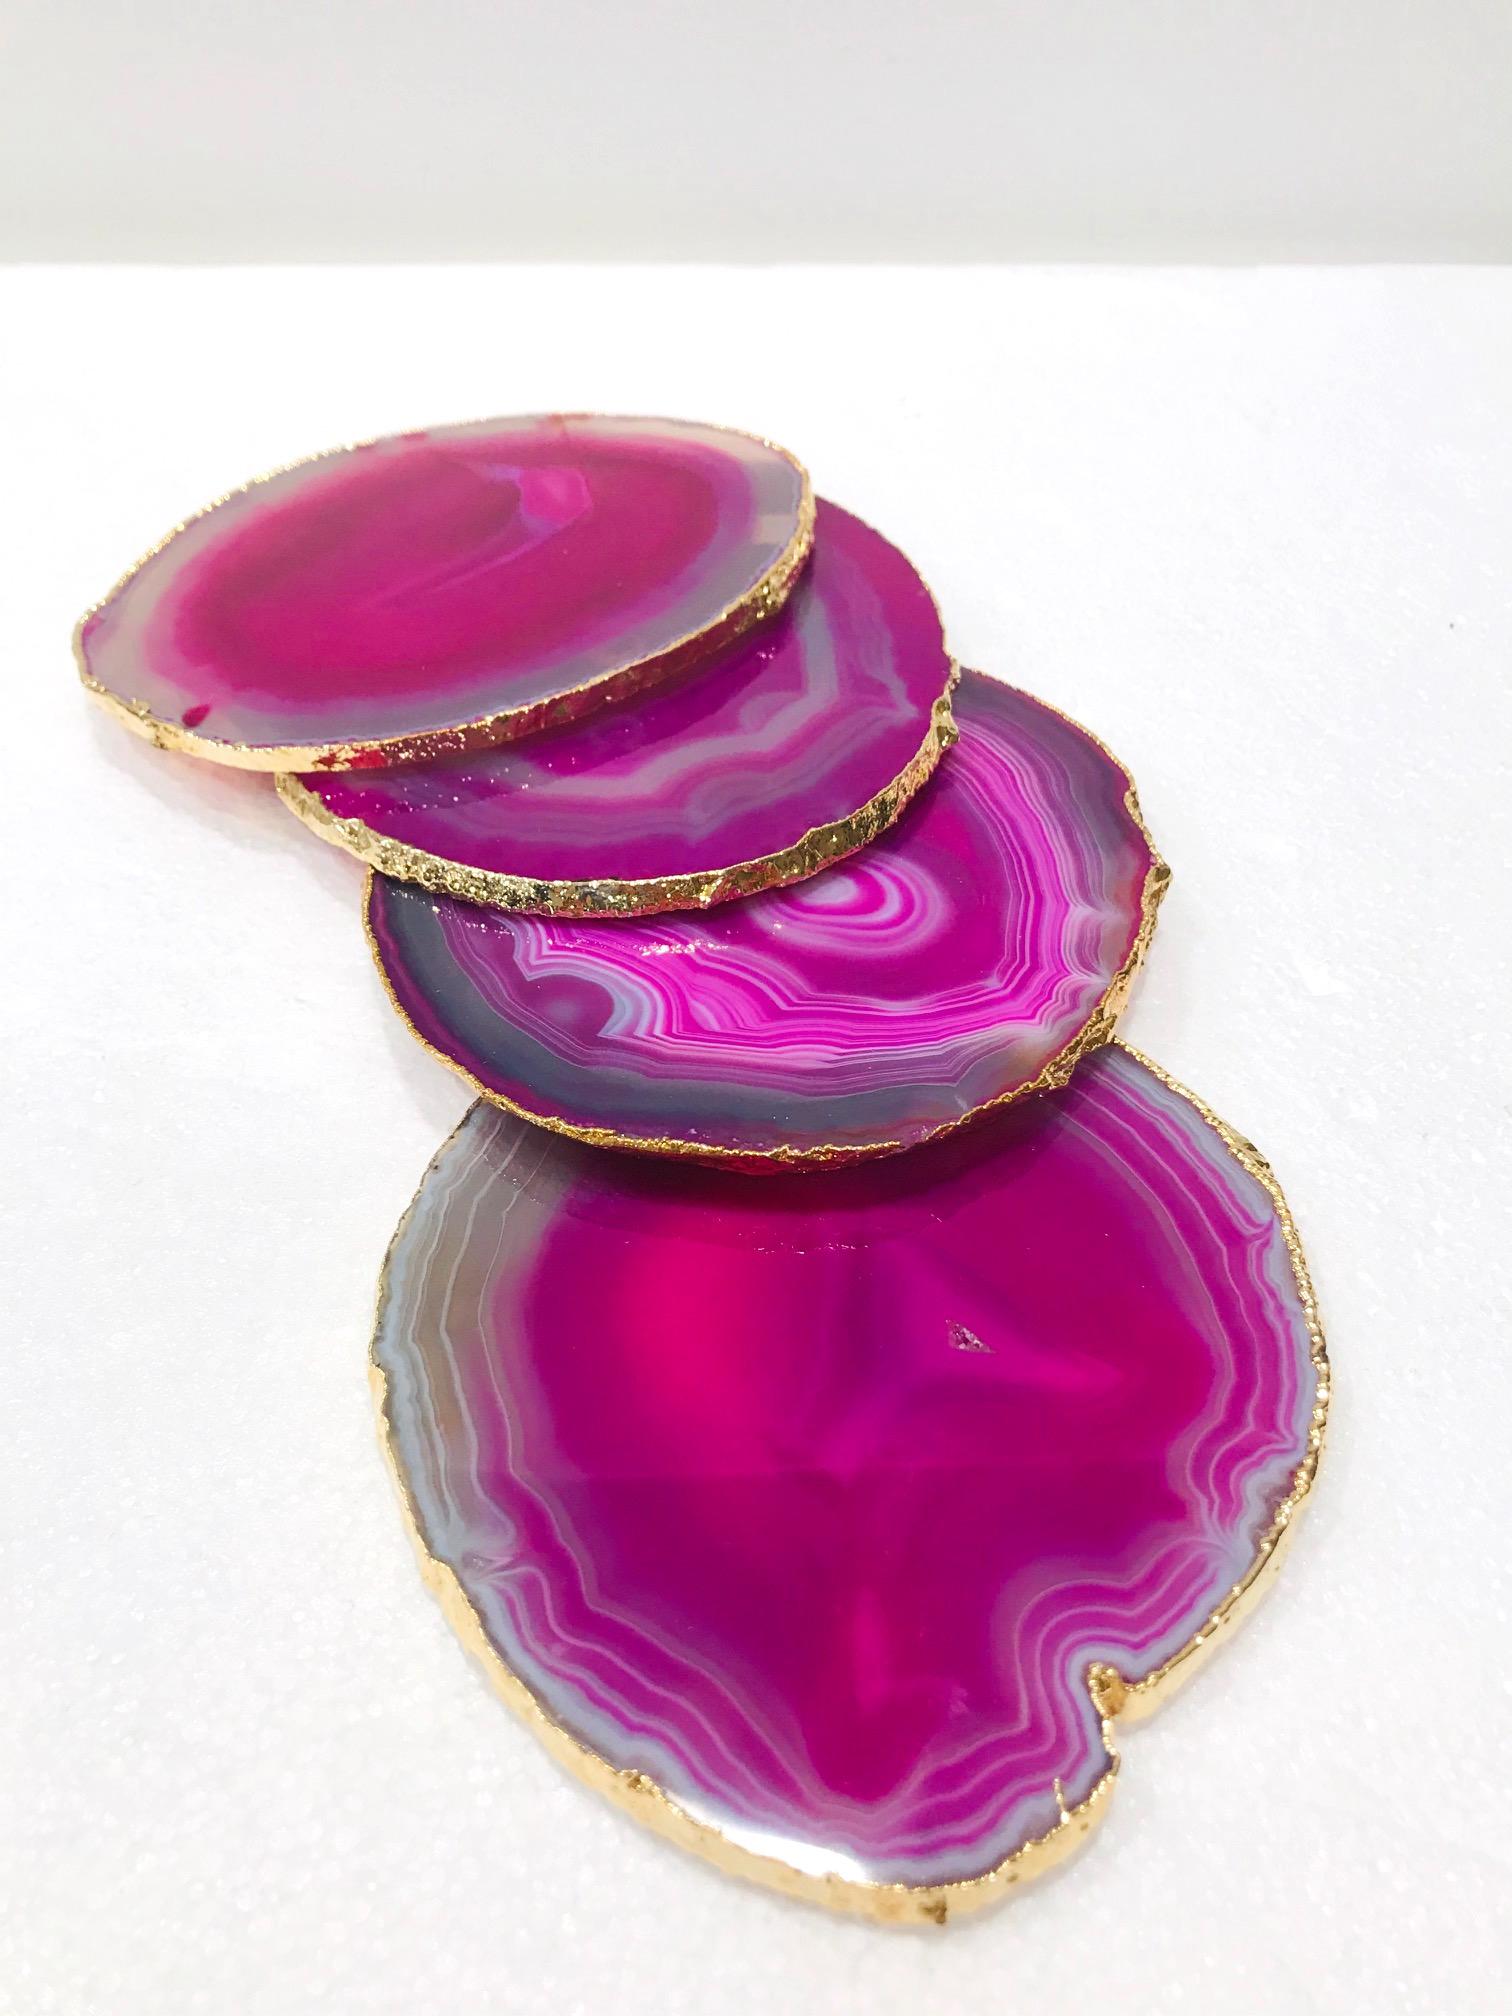 Hollywood Regency Set/ 8 Semi-Precious Gemstone Coasters in Pink and Turquoise with 24K Gold Trim